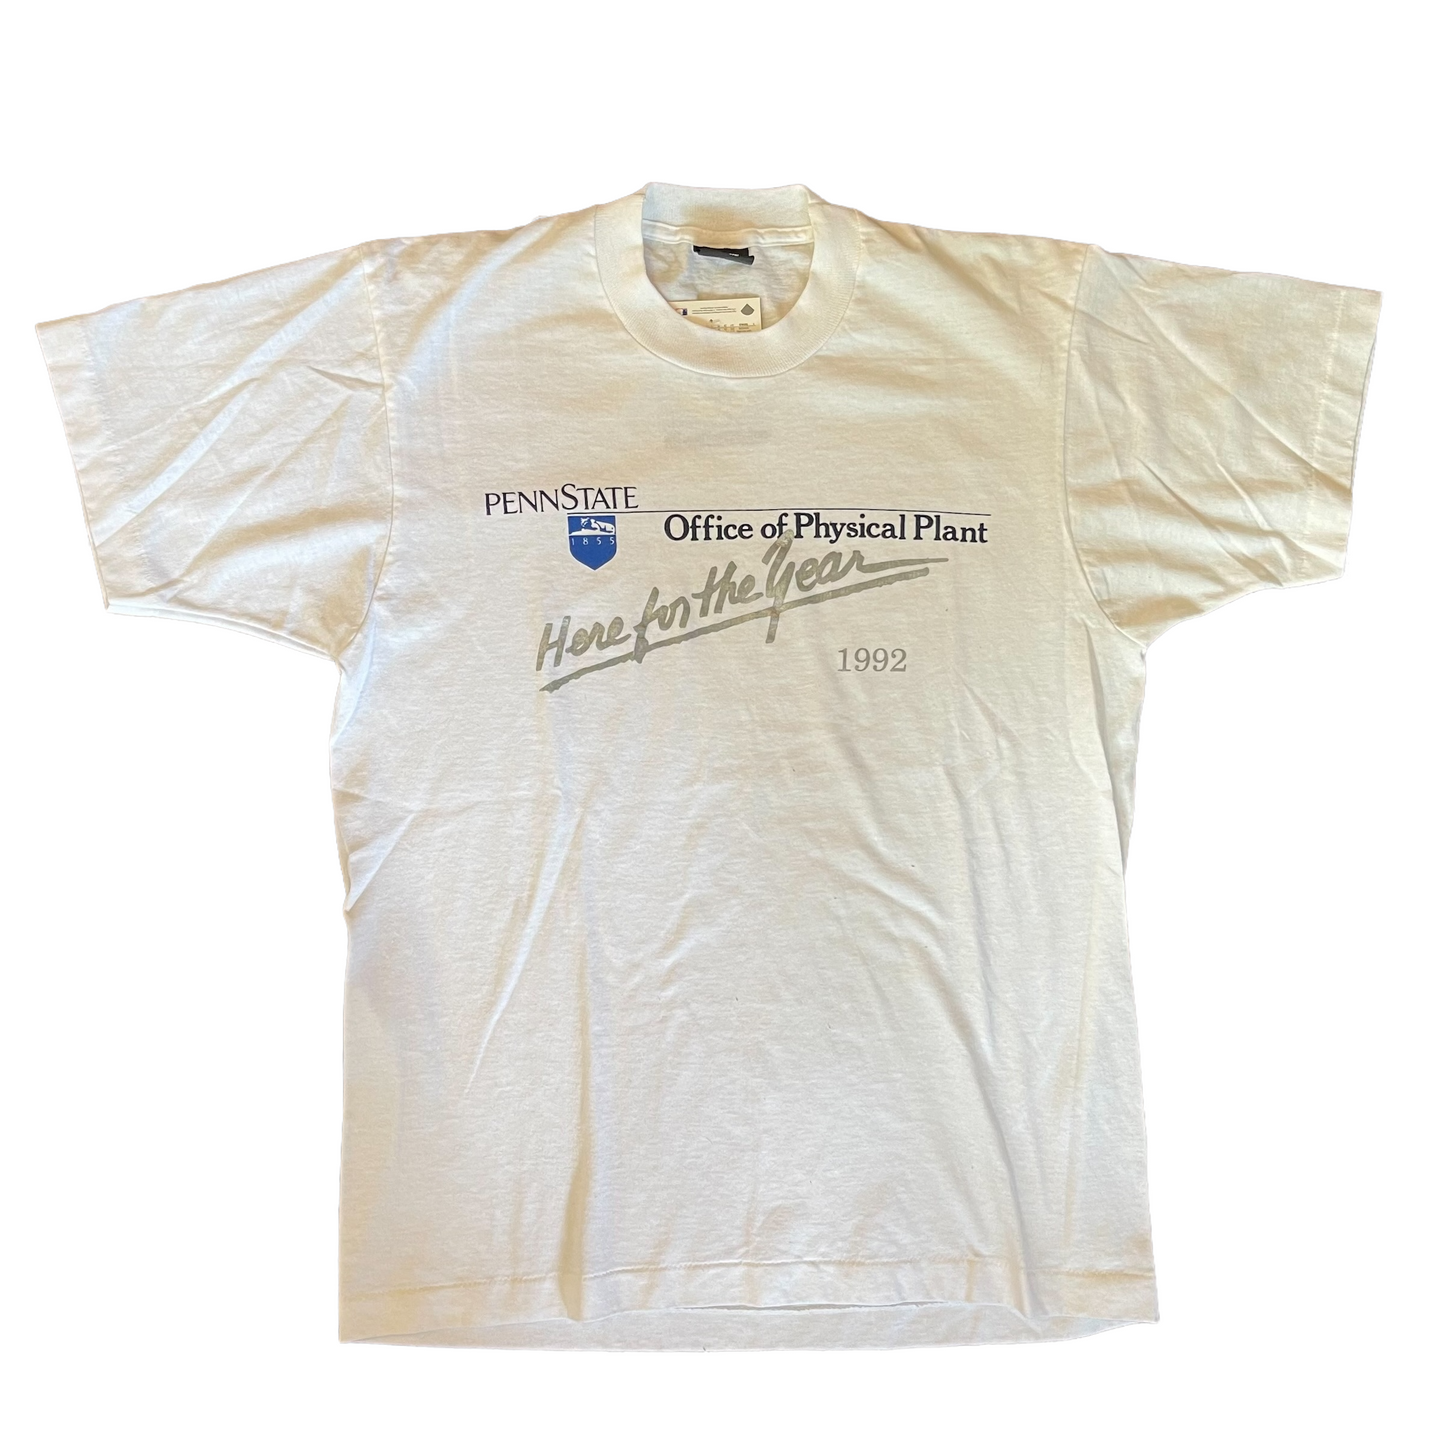 Penn State Physical Plant 1992 Tee